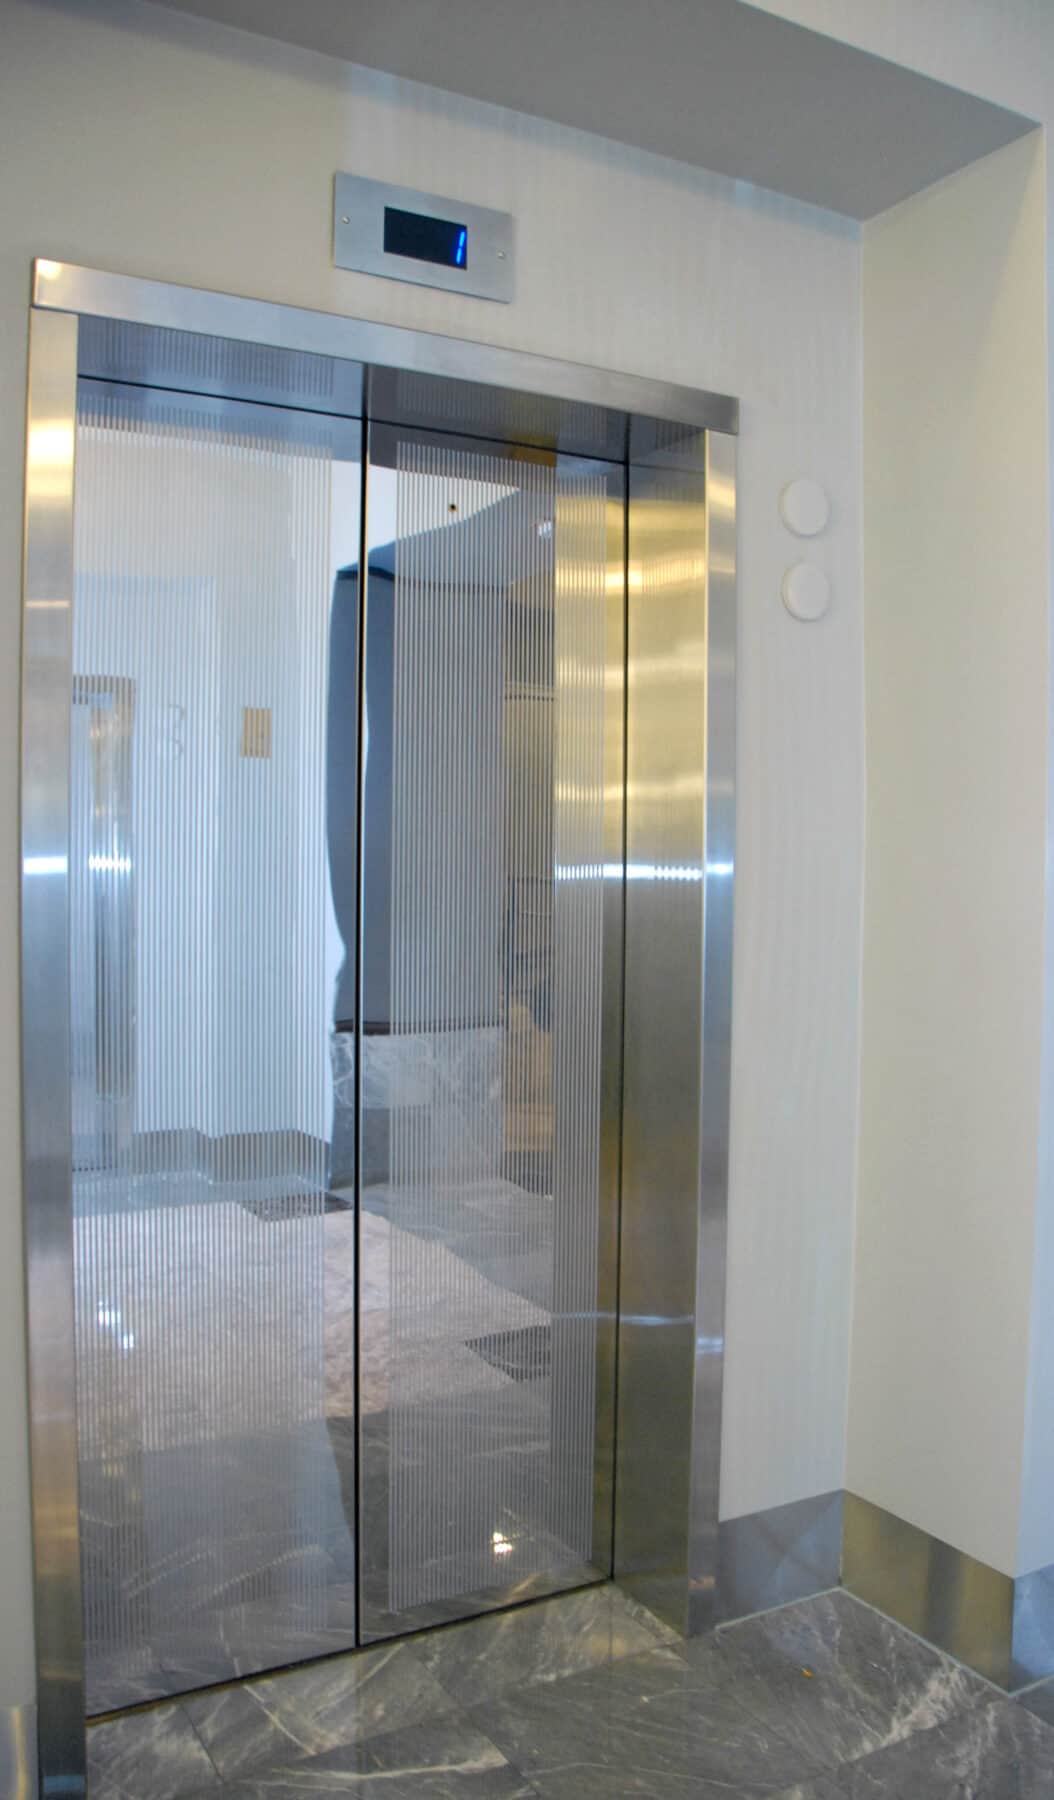 Custom Fabrication of Architectural Metalwork. Specialty Contractors S&E Design Build Featured Project: Etched Elevator Doors